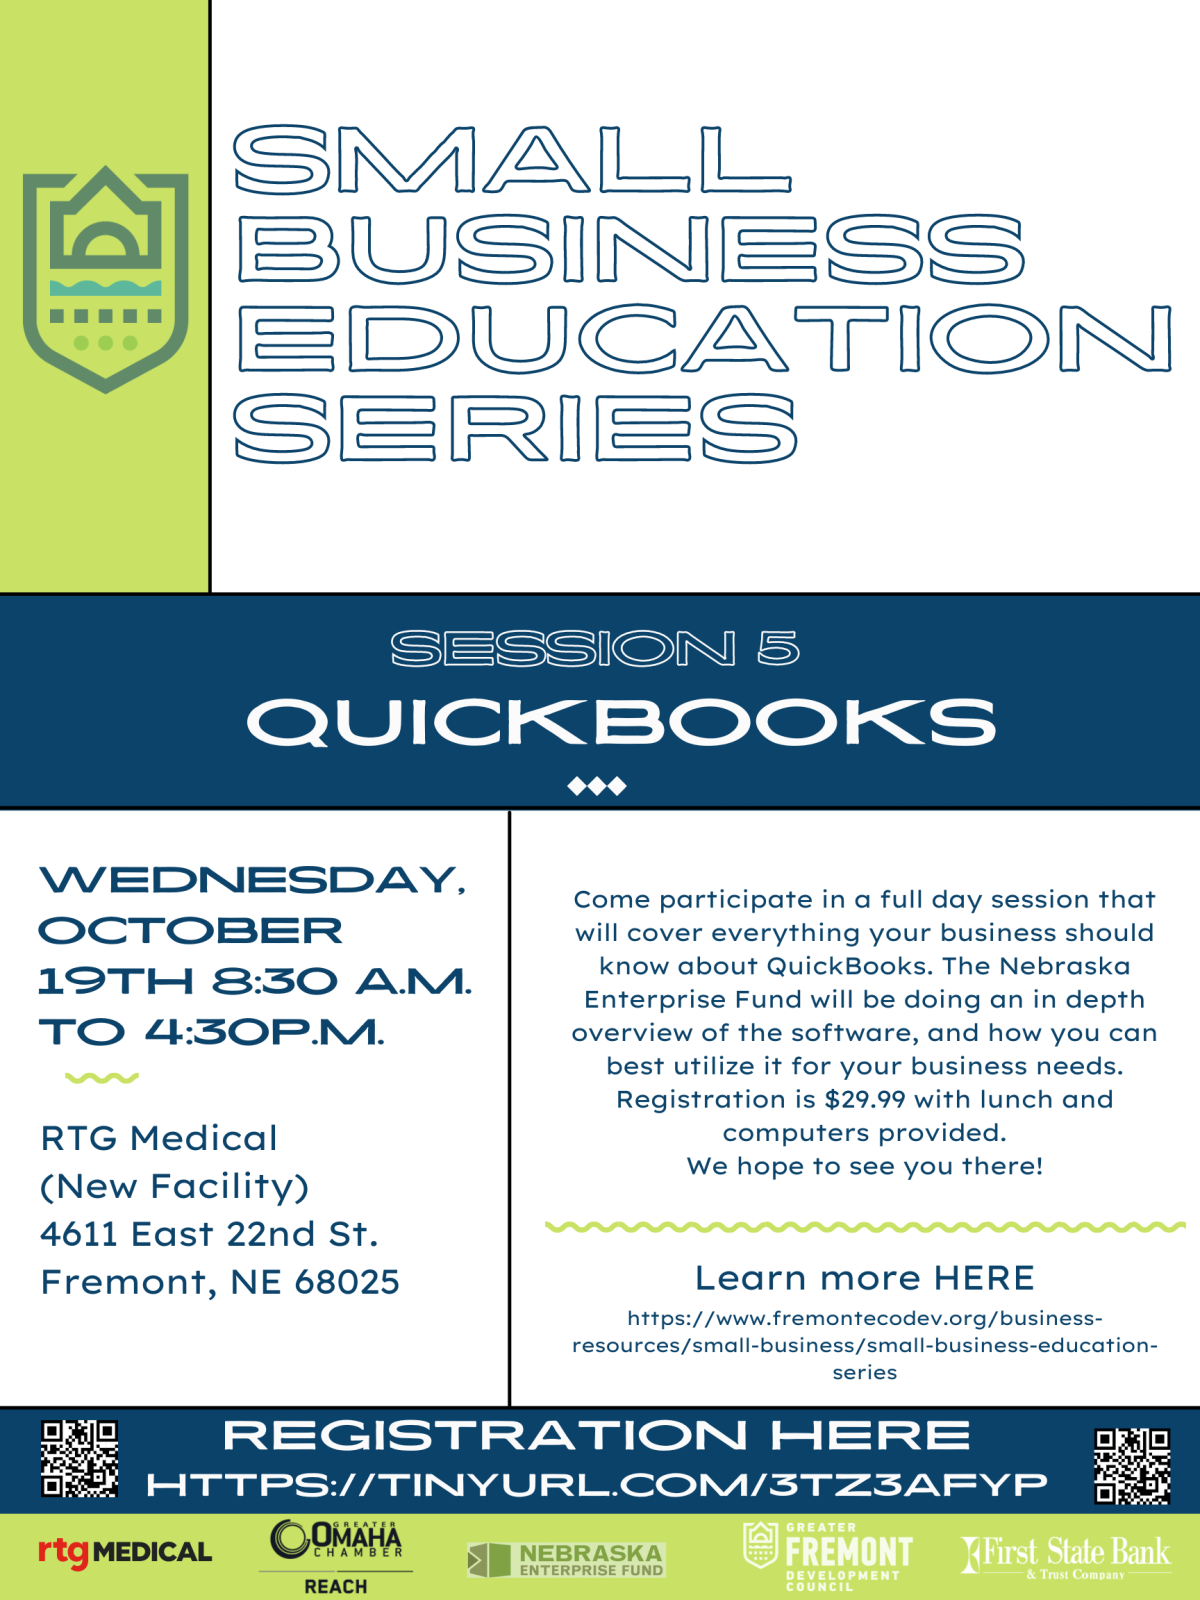 Session 5 of the Greater Fremont Development Council’s Small Business Education Series is on Wednesday, October 19 Photo